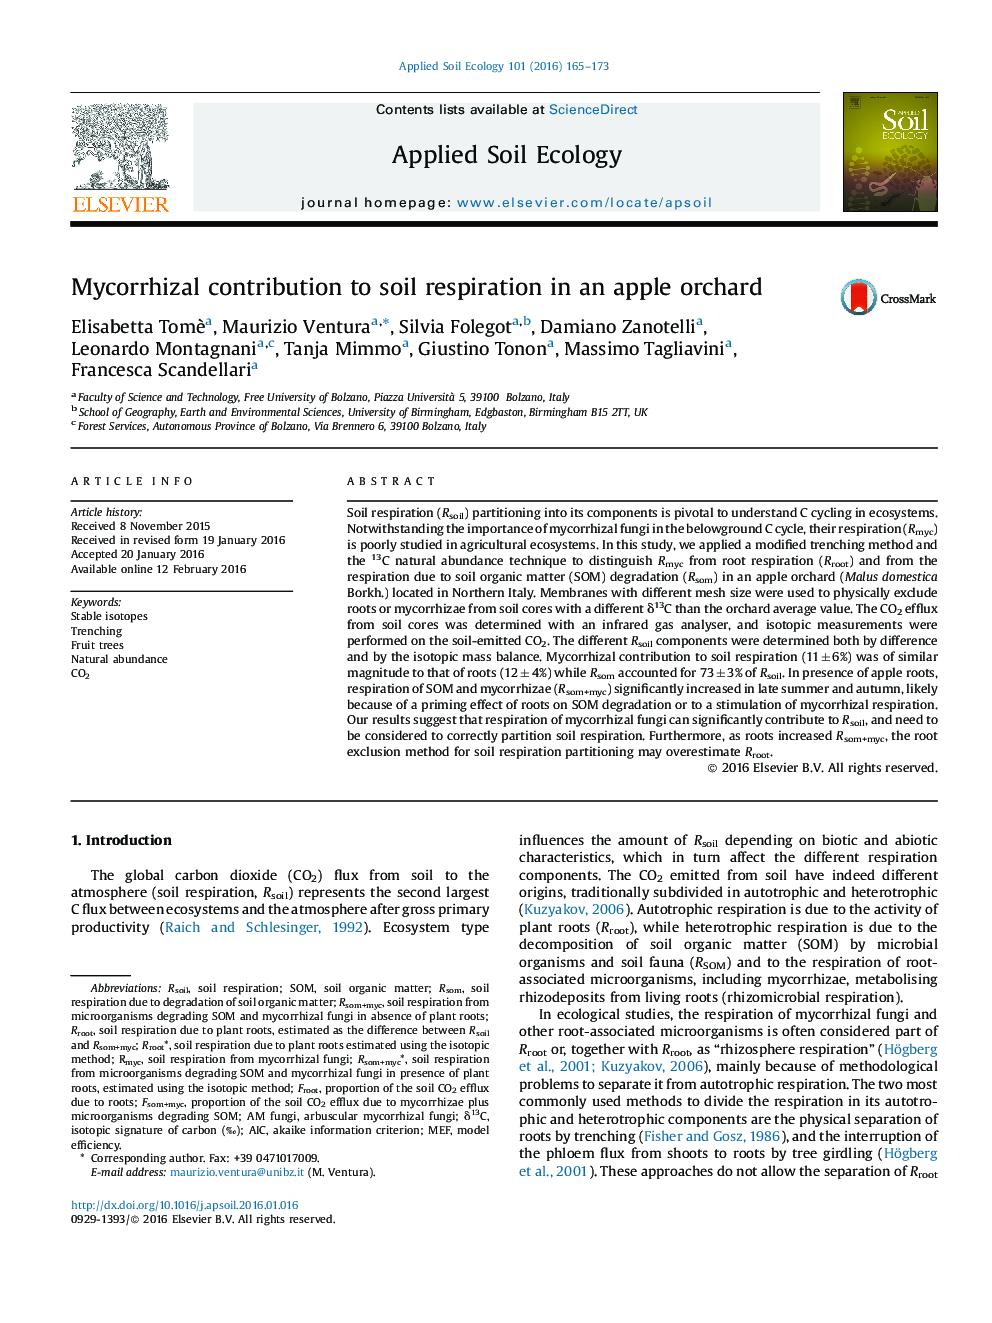 Mycorrhizal contribution to soil respiration in an apple orchard